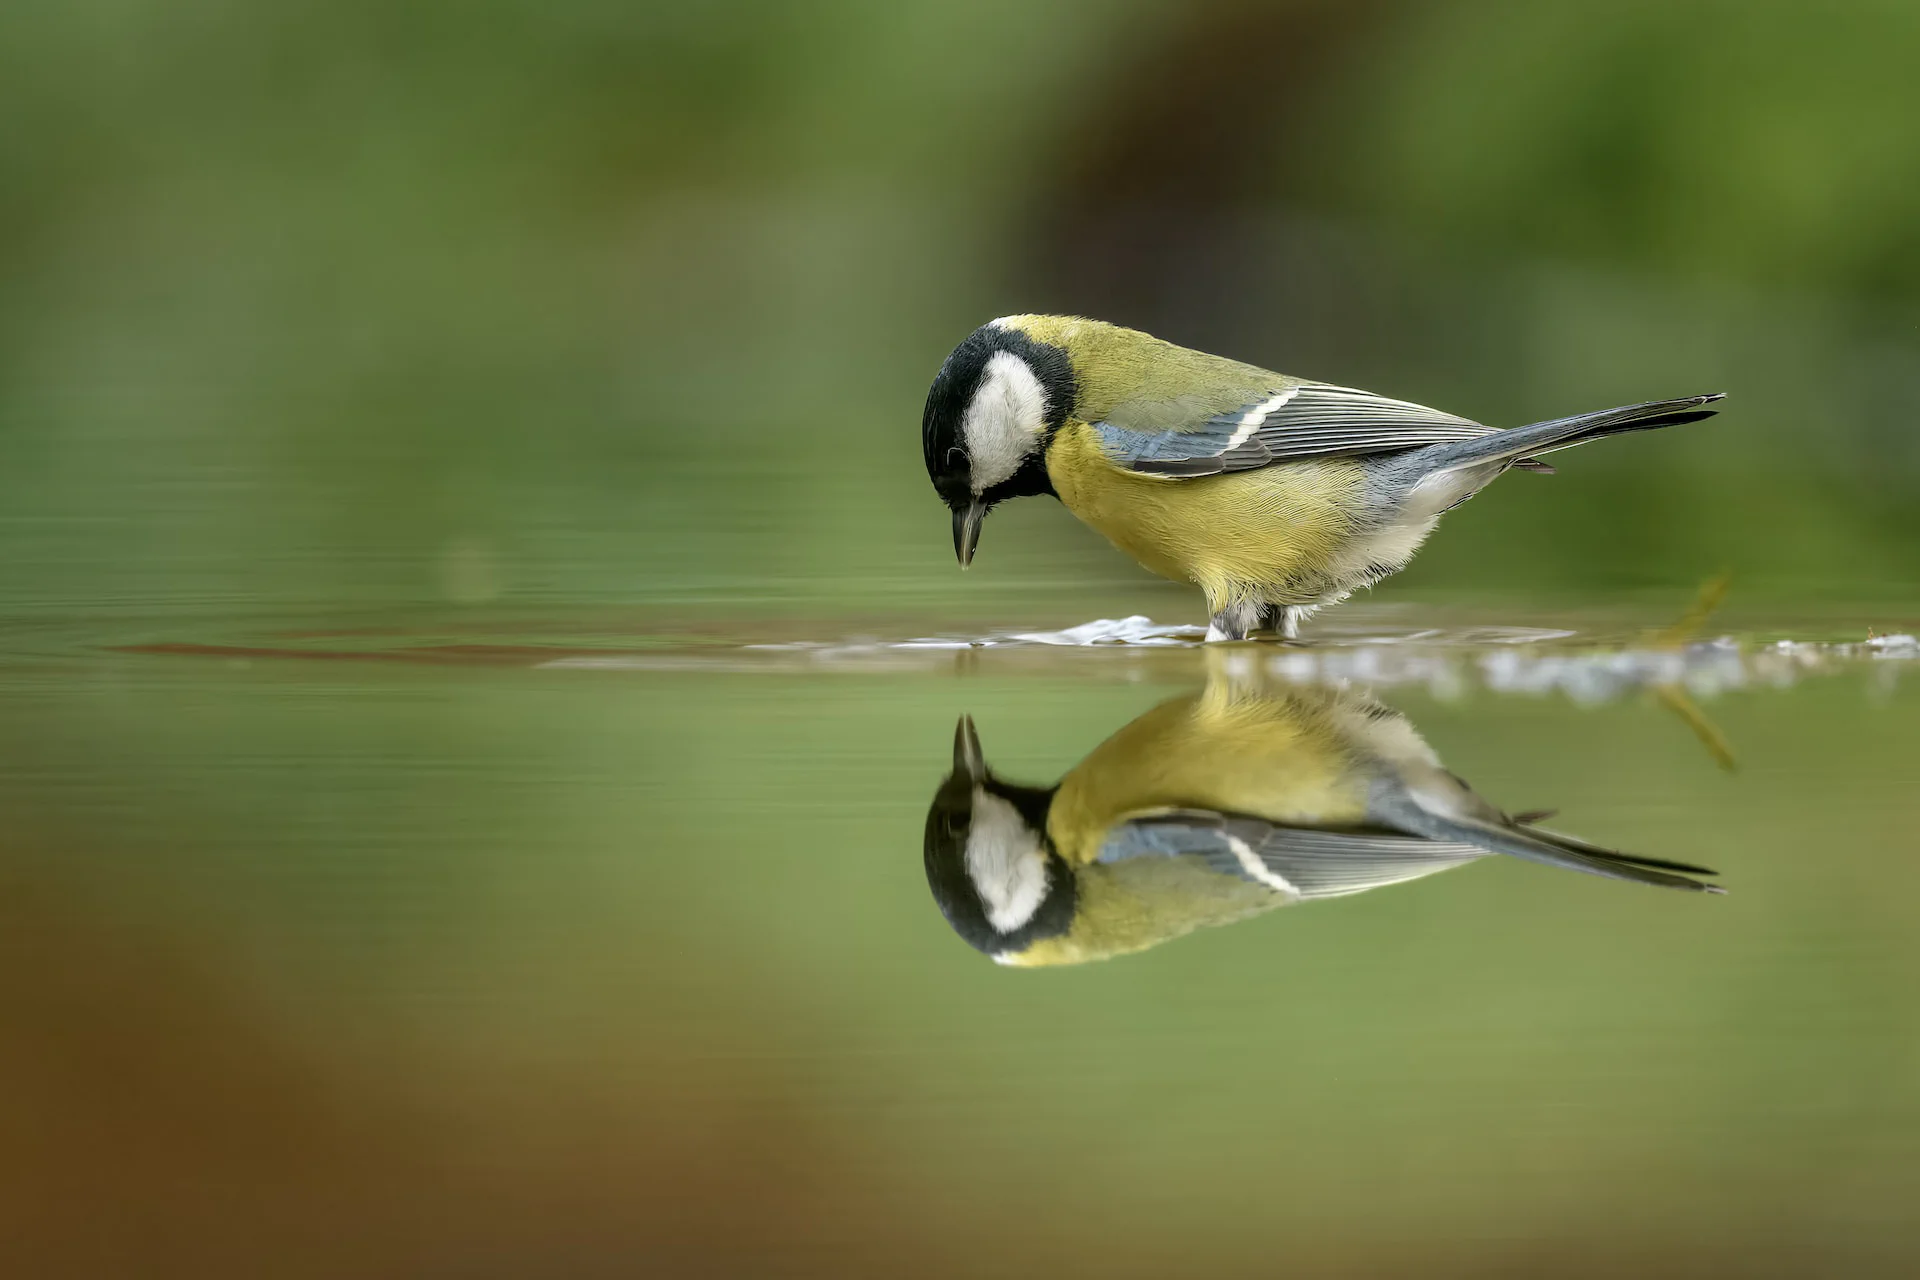 A yellow and black bird sitting on top of a body of water